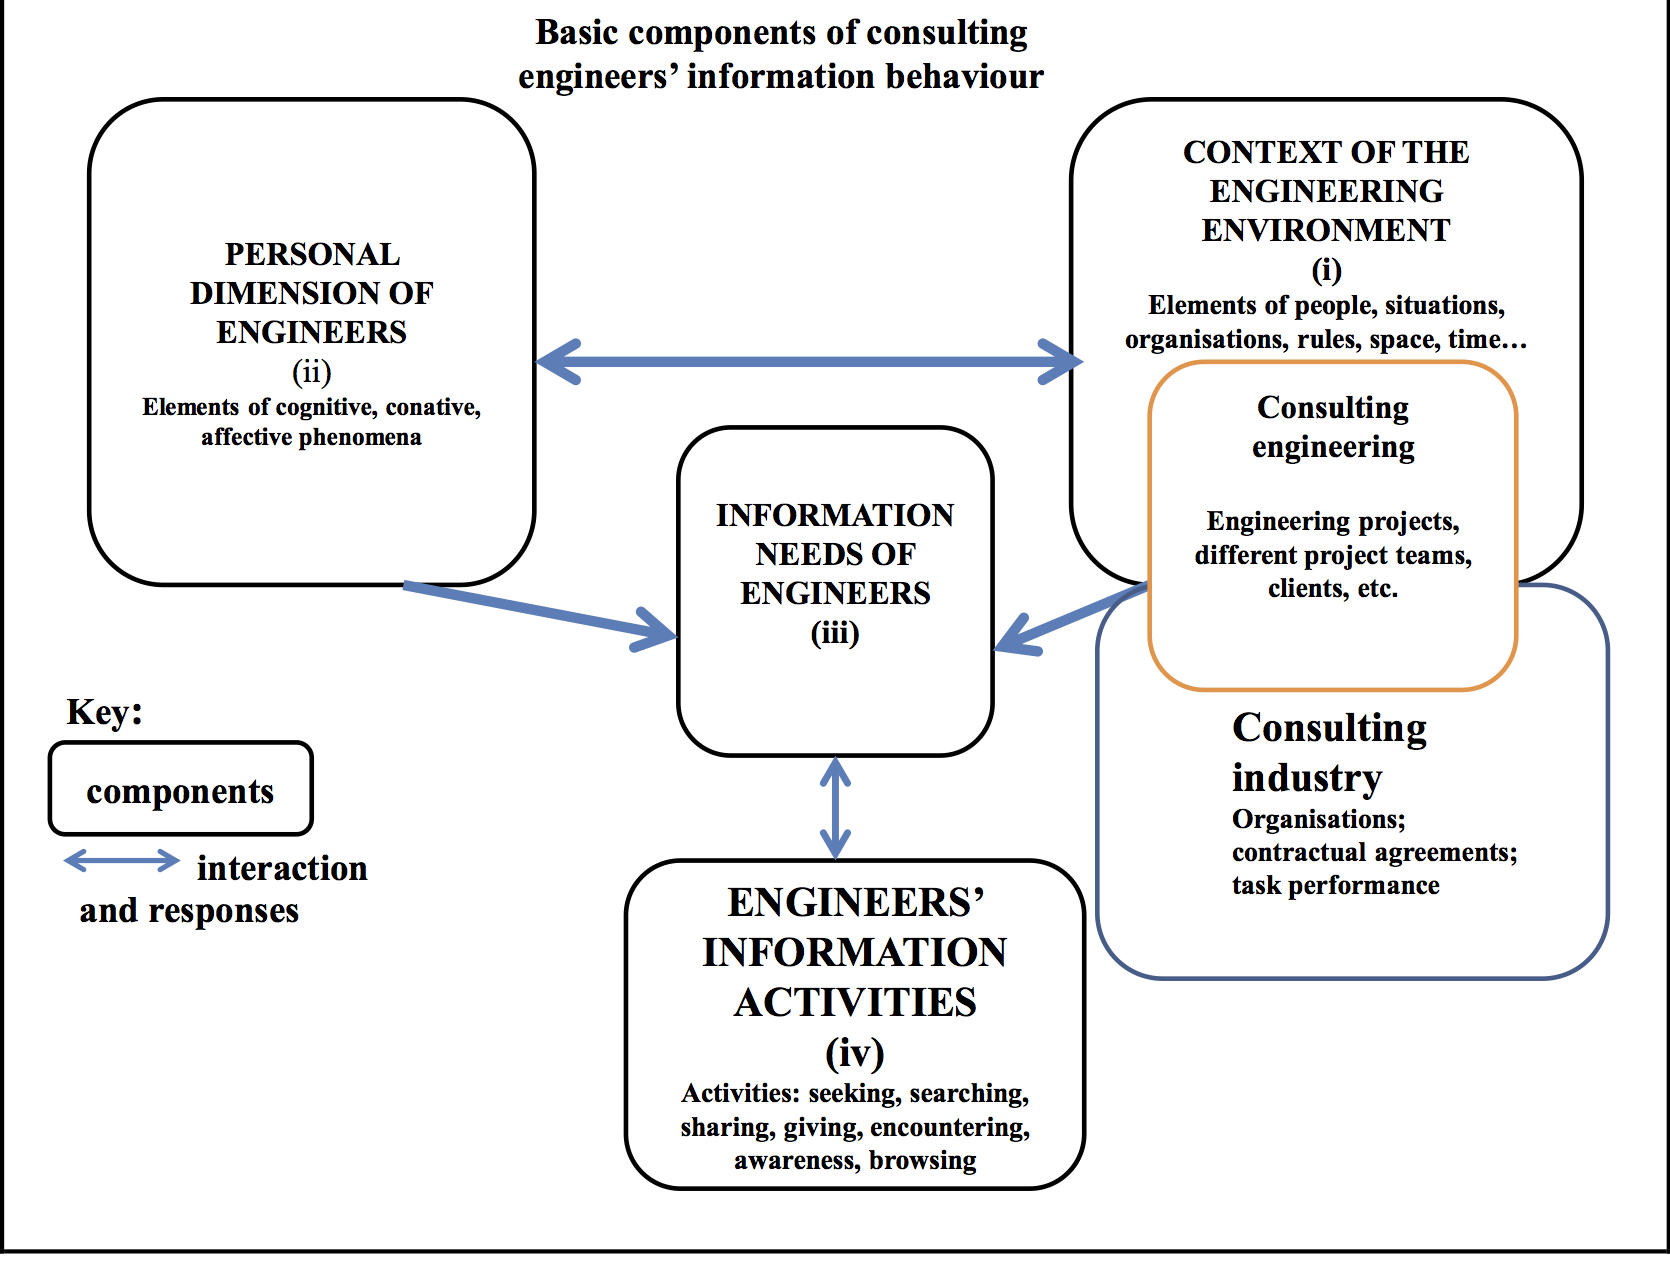 Core components contributing to the information behaviour of consulting engineers